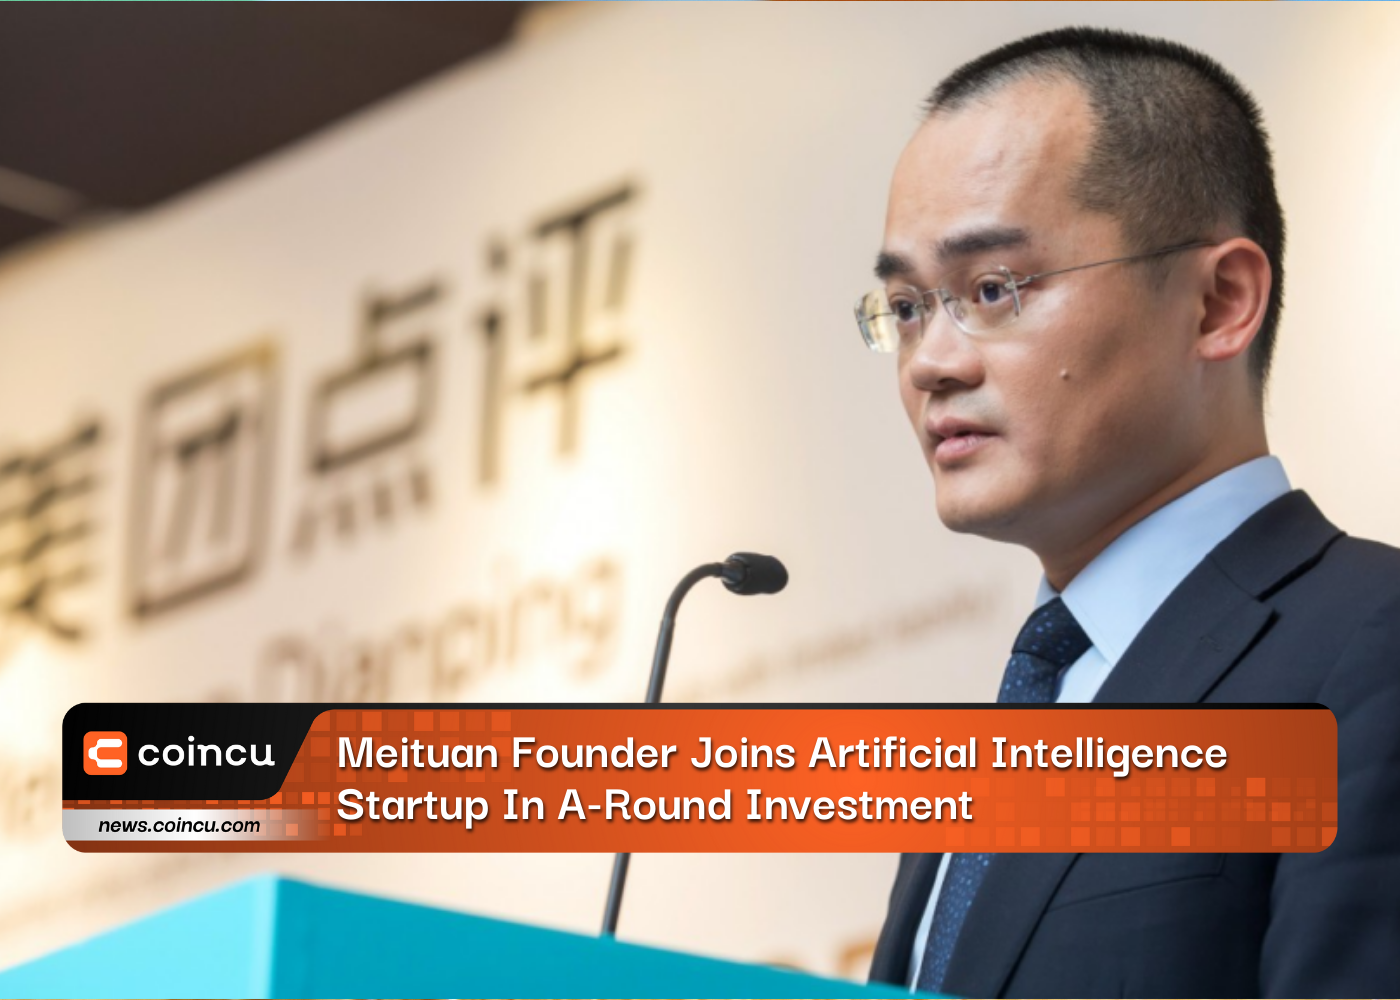 Meituan Founder Joins Artificial Intelligence Startup In A-Round Investment